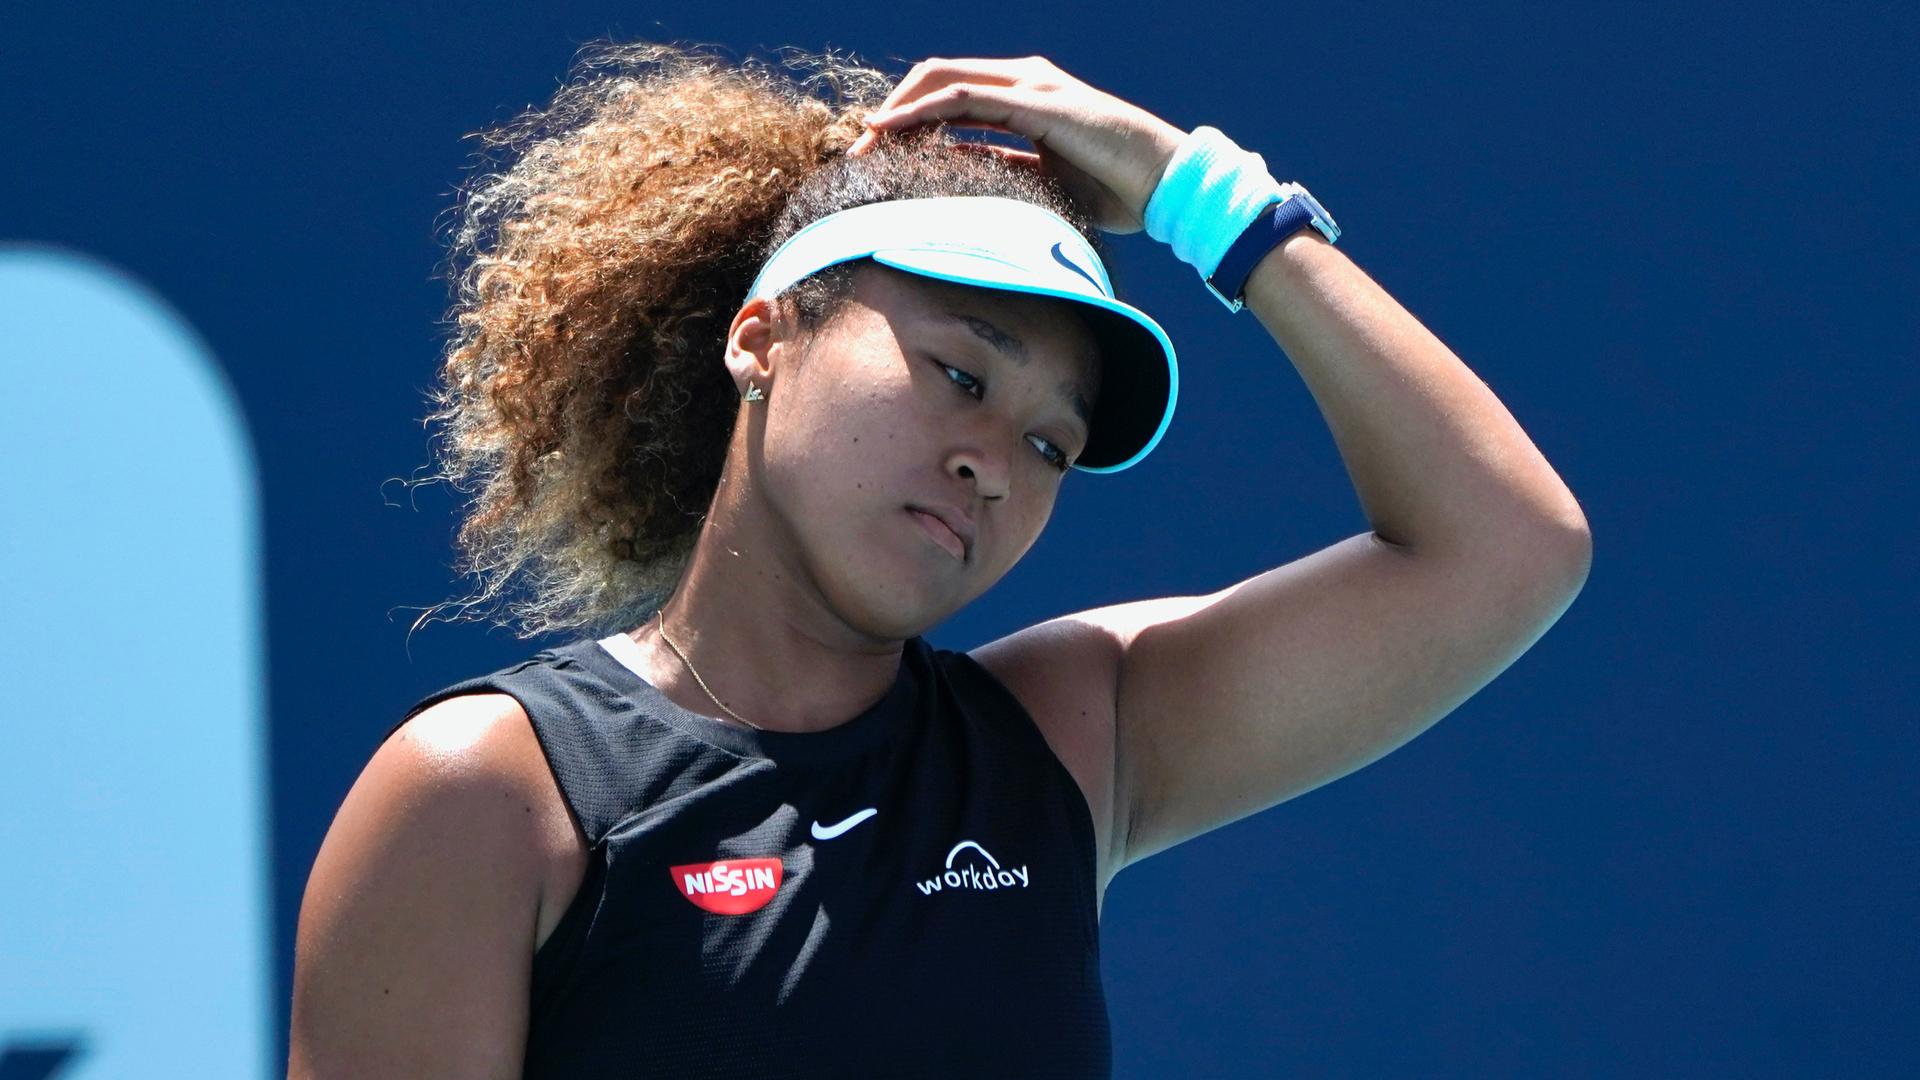 Naomi Osaka, in a tennis hat and ponytail, puts her hand on her head